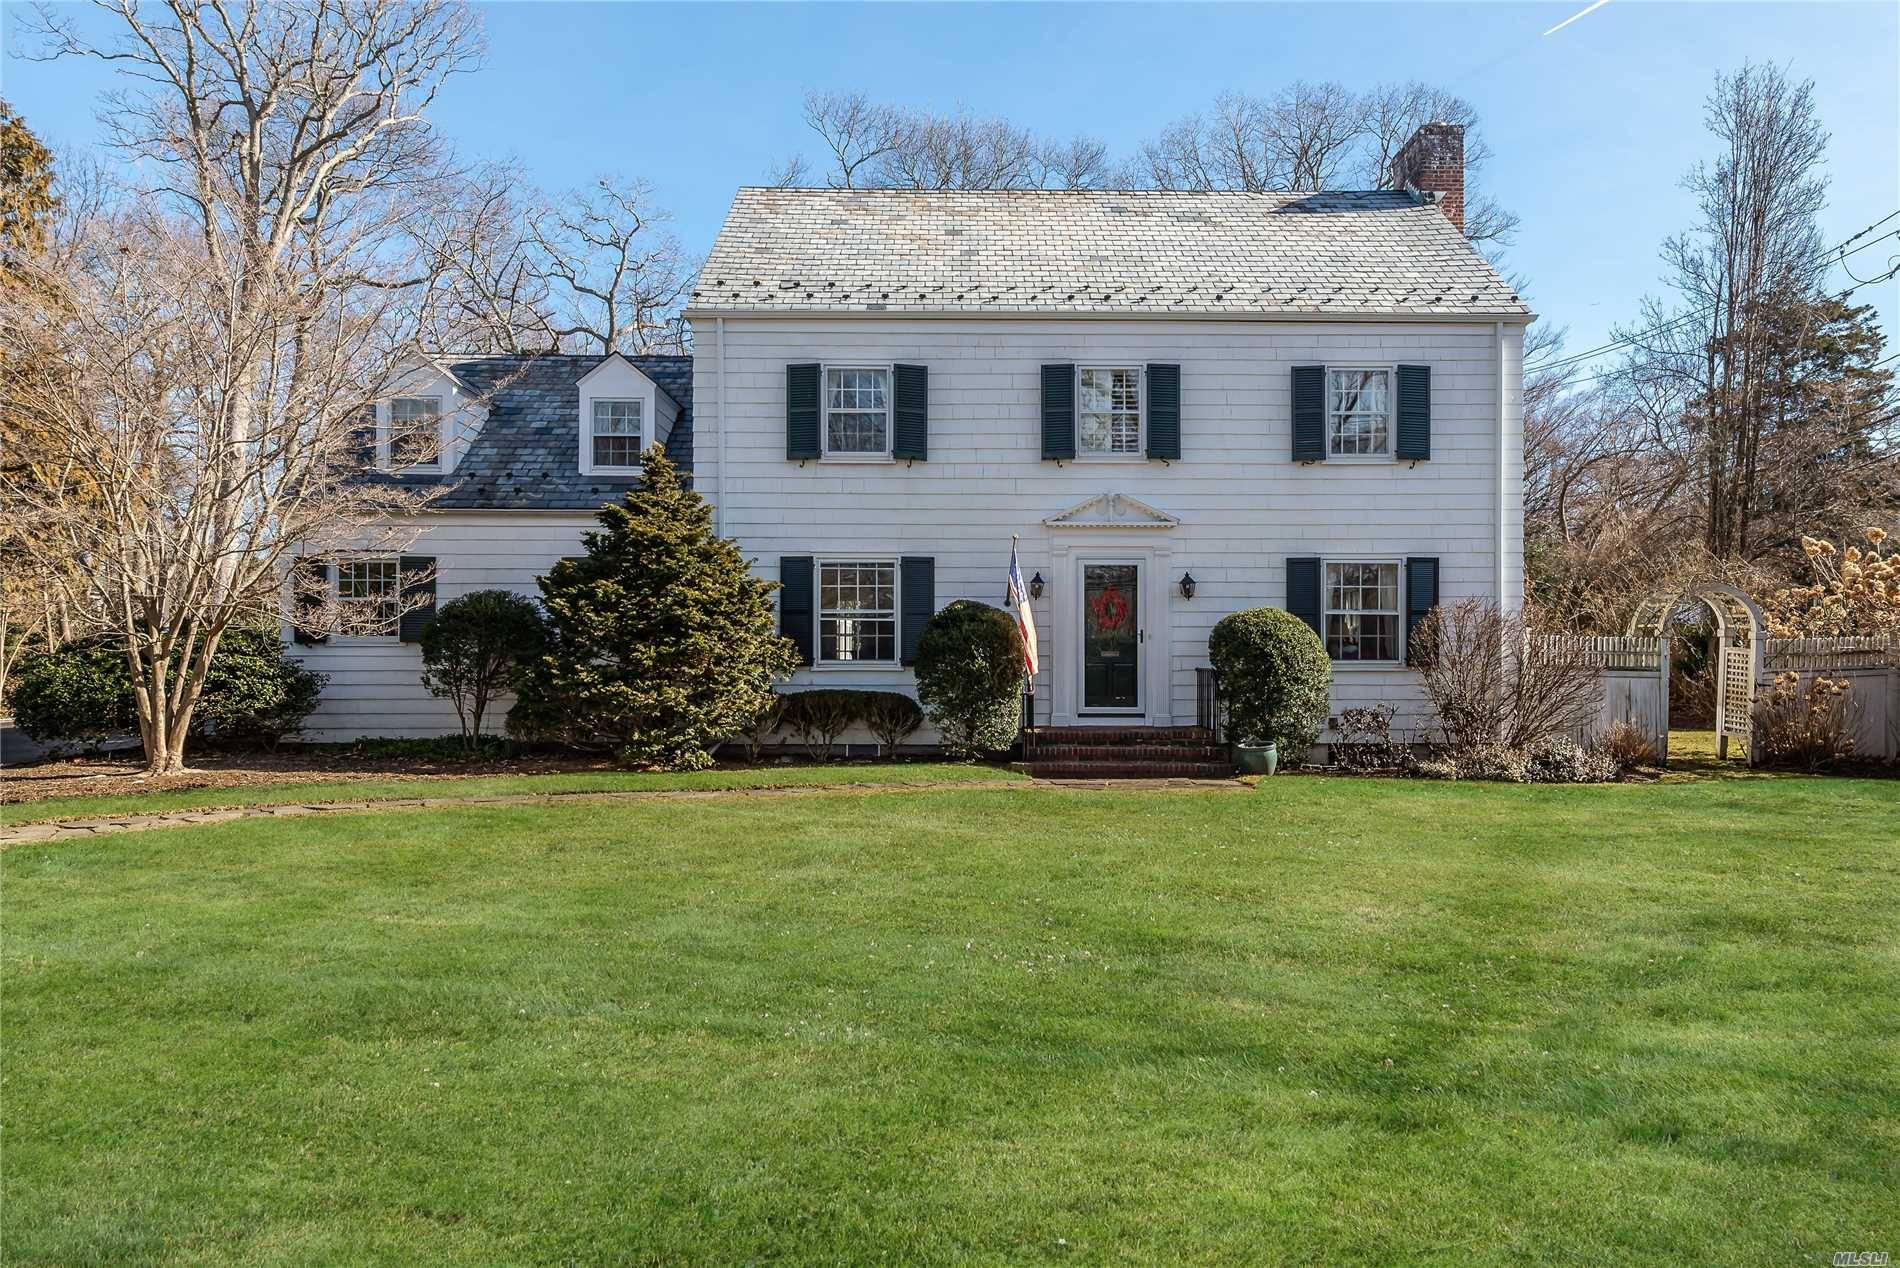 Perfectly Situated In N. Syosset, This Elegant And Open Center Hall Colonial Will Charm You The Moment You Enter The Distinguished Gated Entrance.